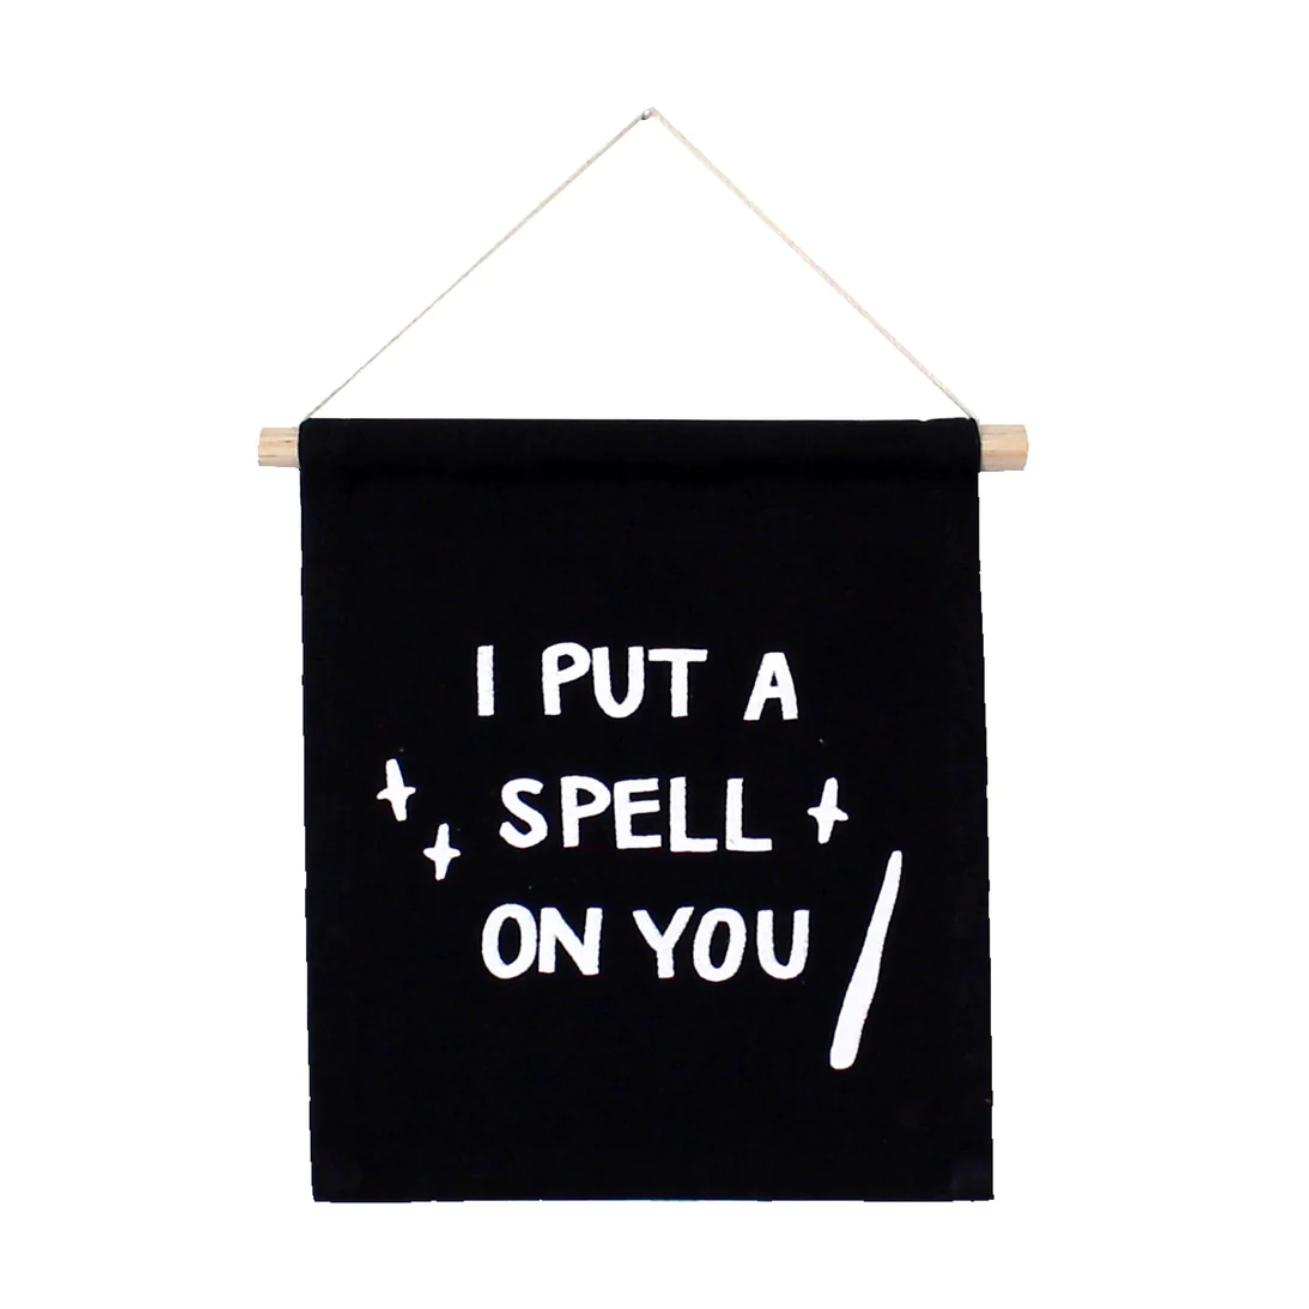 Imani Collective Décor "I Put a Spell on You" Halloween Hang Sign by Imani Collective Creepin' it Real Hang Sign | Halloween Decor for Kids | The Playful Peacock